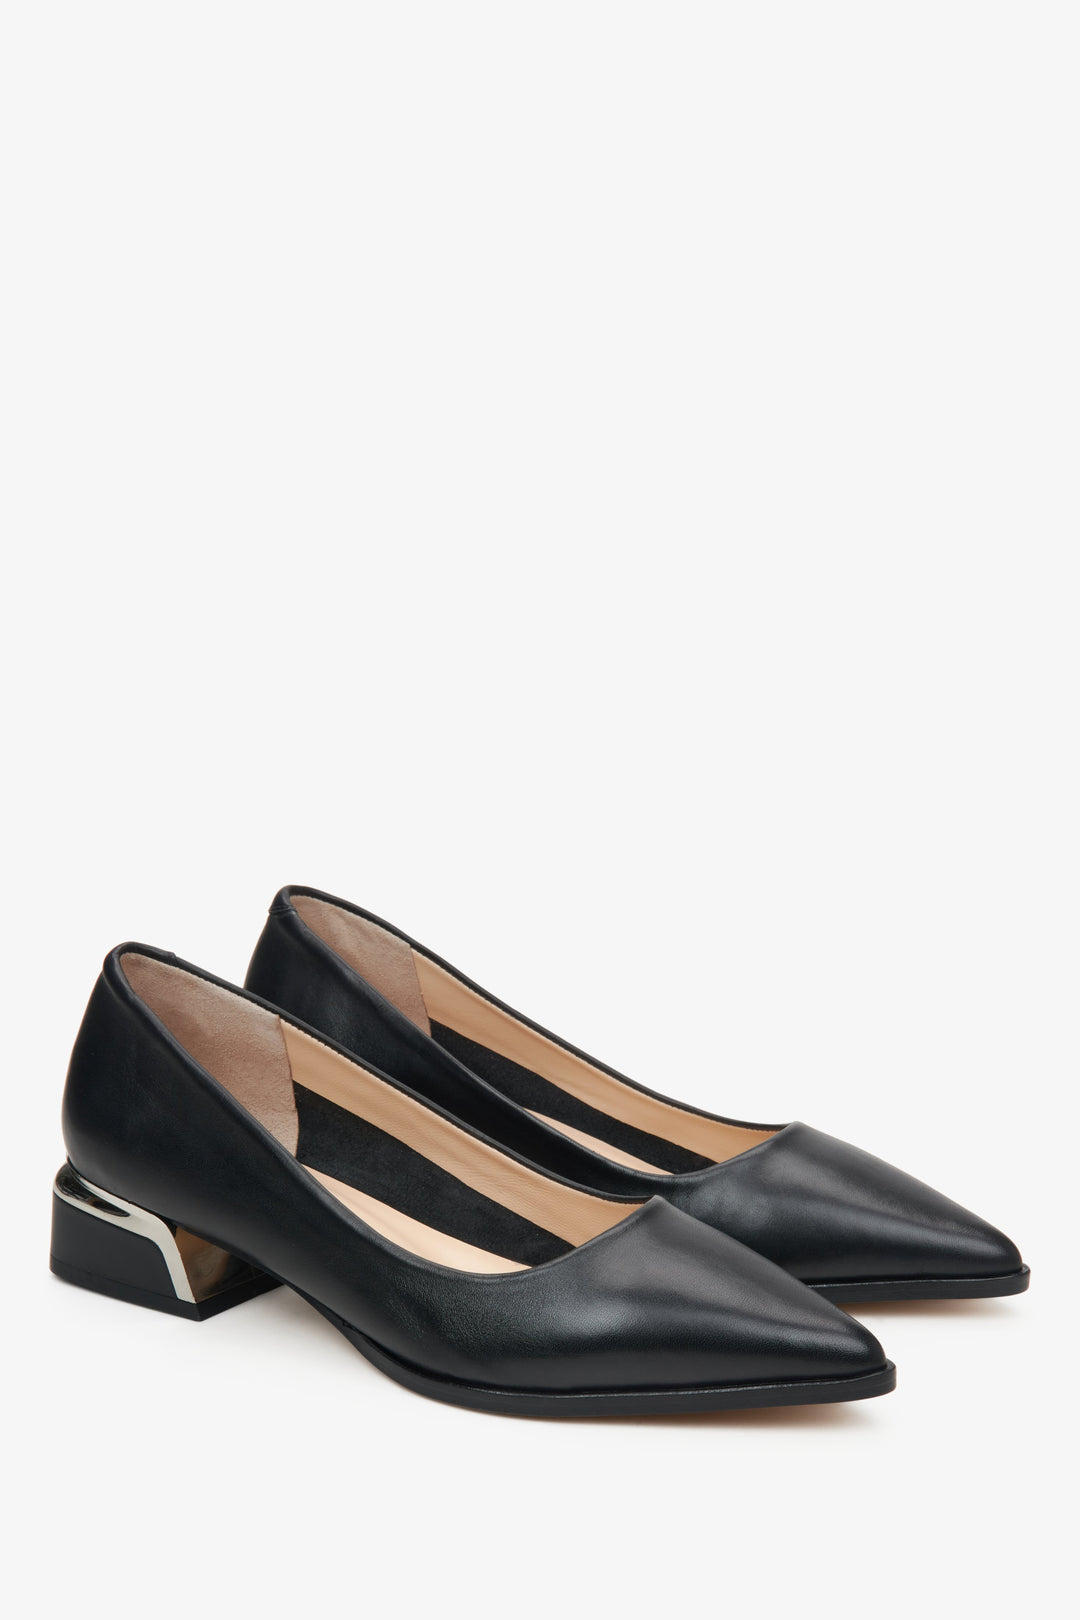 Women's black leather pumps by Estro with a pointed toe.